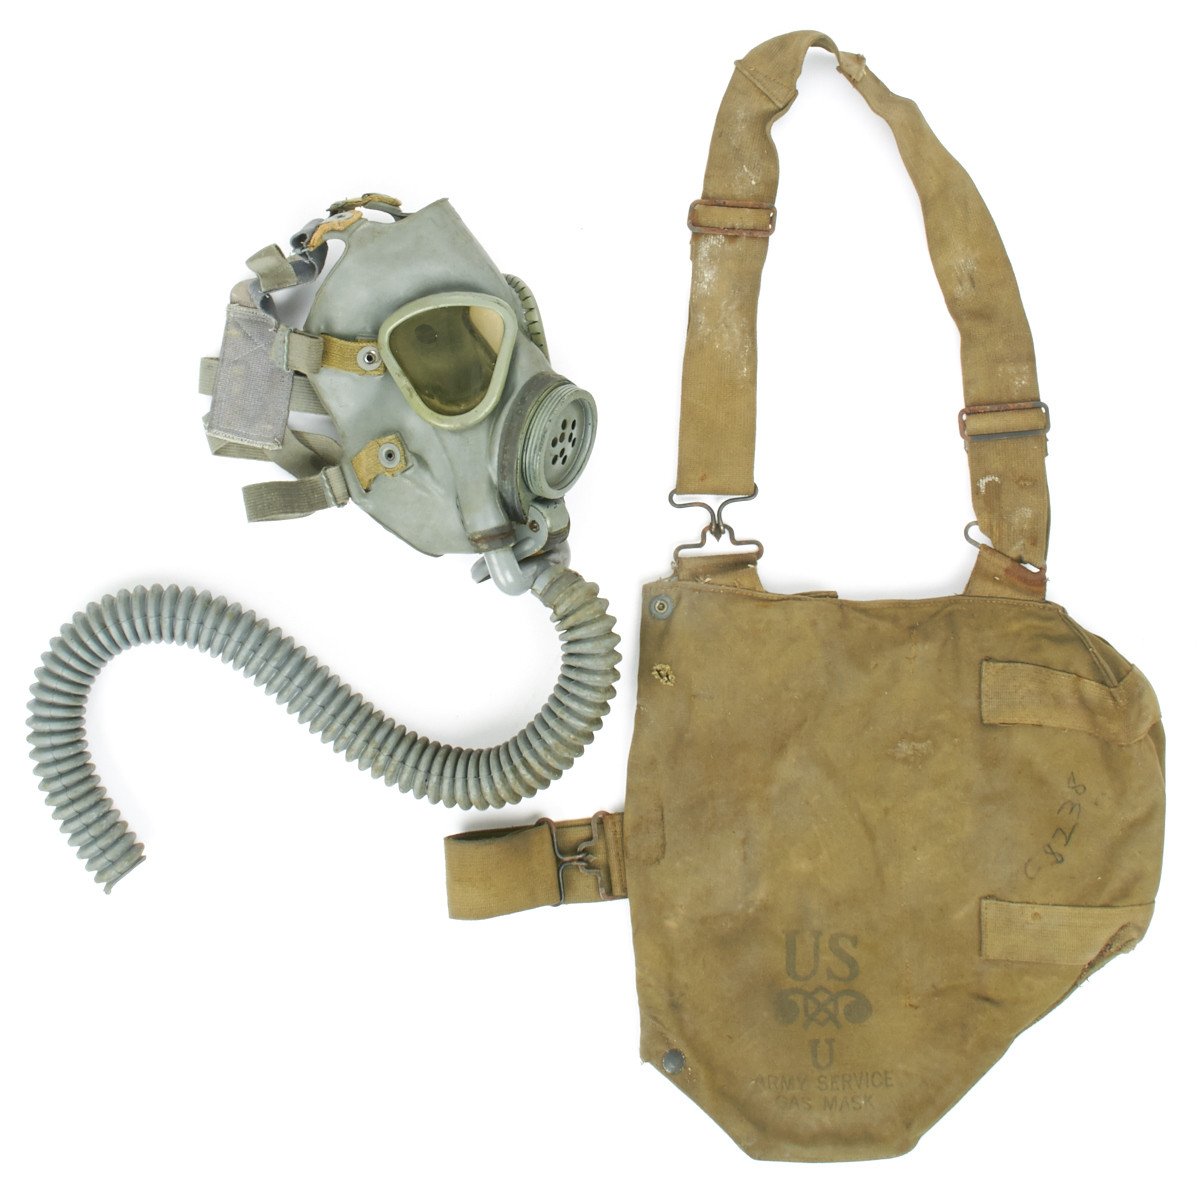 GAS MASK M6 US M3 WWII SAC GI ARMY MILITARIA NORMANDY INFANTRY DIVISIO